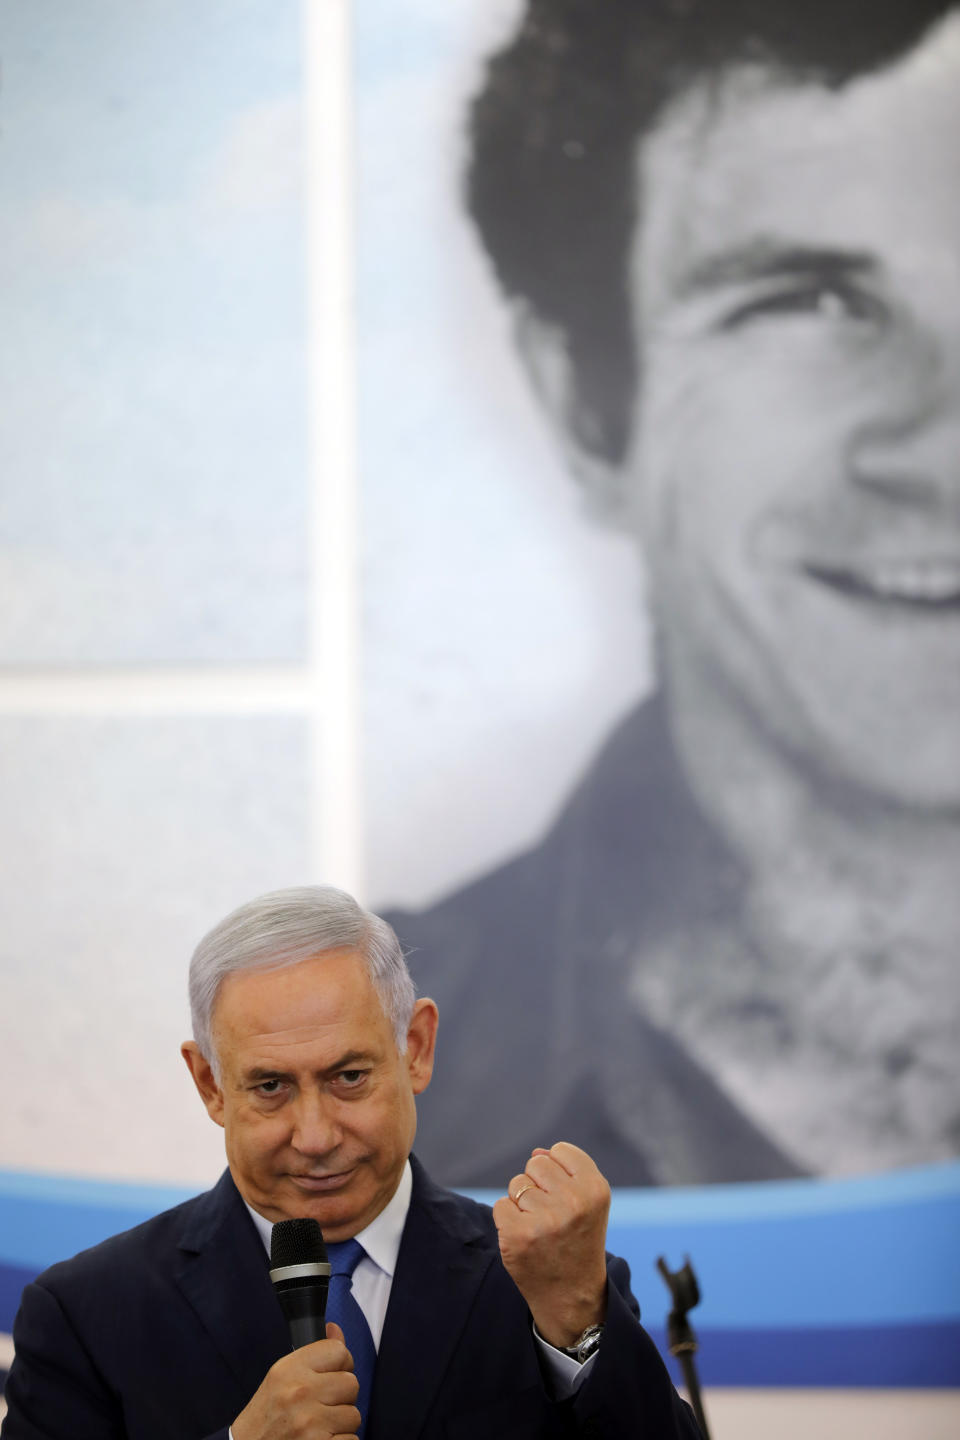 Israeli Prime Minister Benjamin Netanyahu speaks to students as he stands in front of a banner depicting his late brother Yonatan Netanyahu, during a dedication ceremony at Ort Samaria Ulpana school in the settlement of Elkana Sunday, Sept. 1, 2019. Netanyahu is reaffirming his pledge to impose Israeli sovereignty on West Bank settlements. (Amir Cohen/Pool Photo via AP)